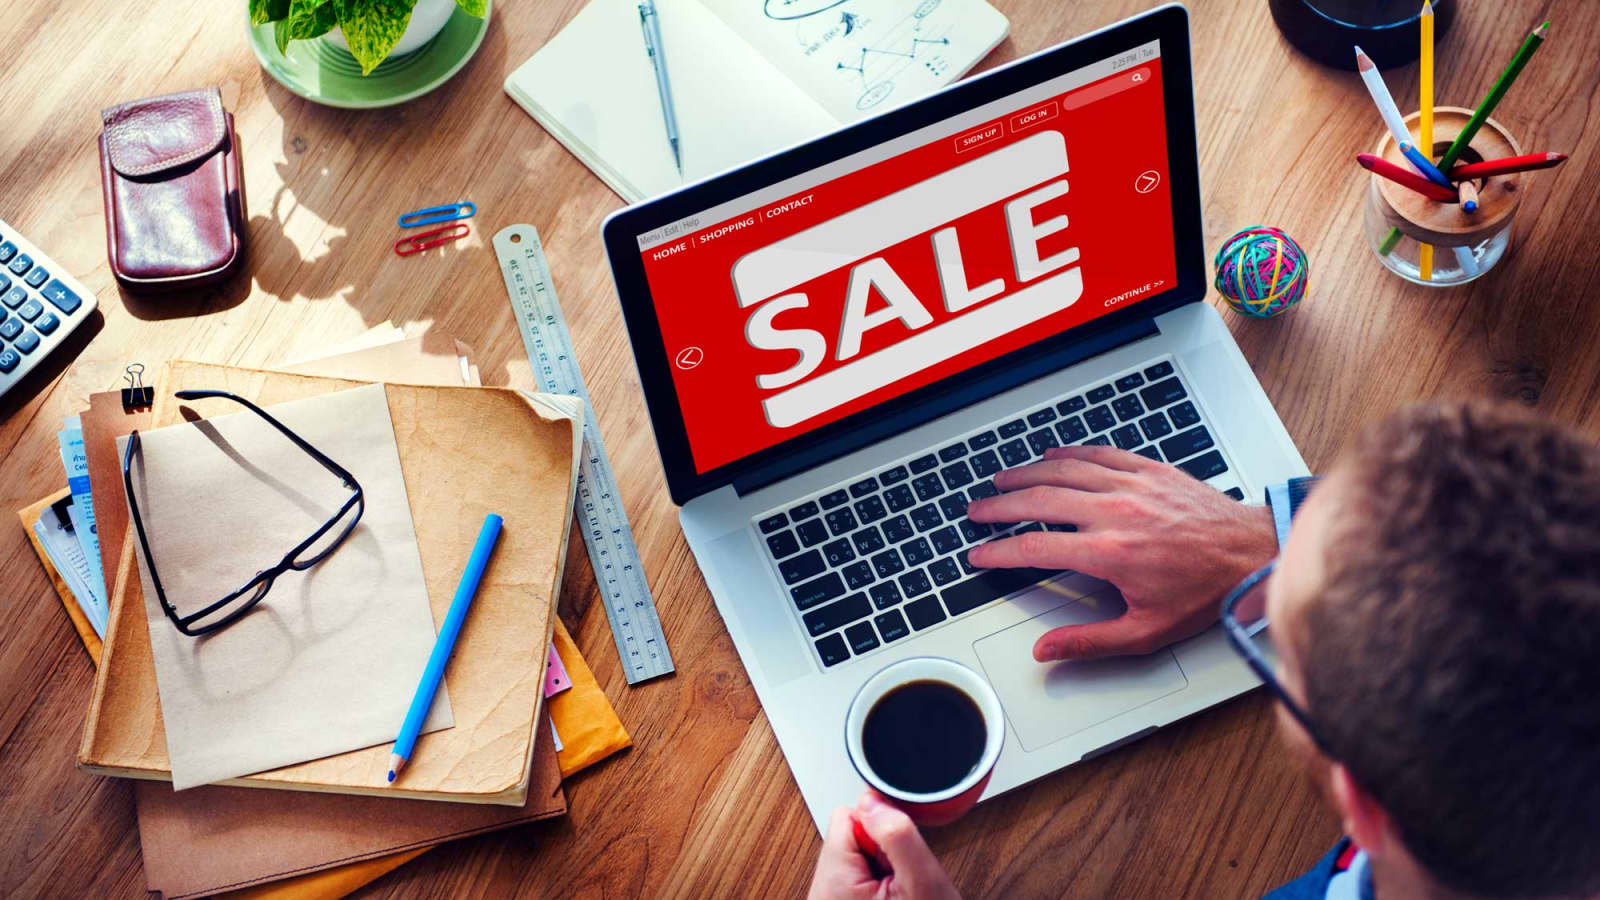 Online shopping scams: How to identify fake sites